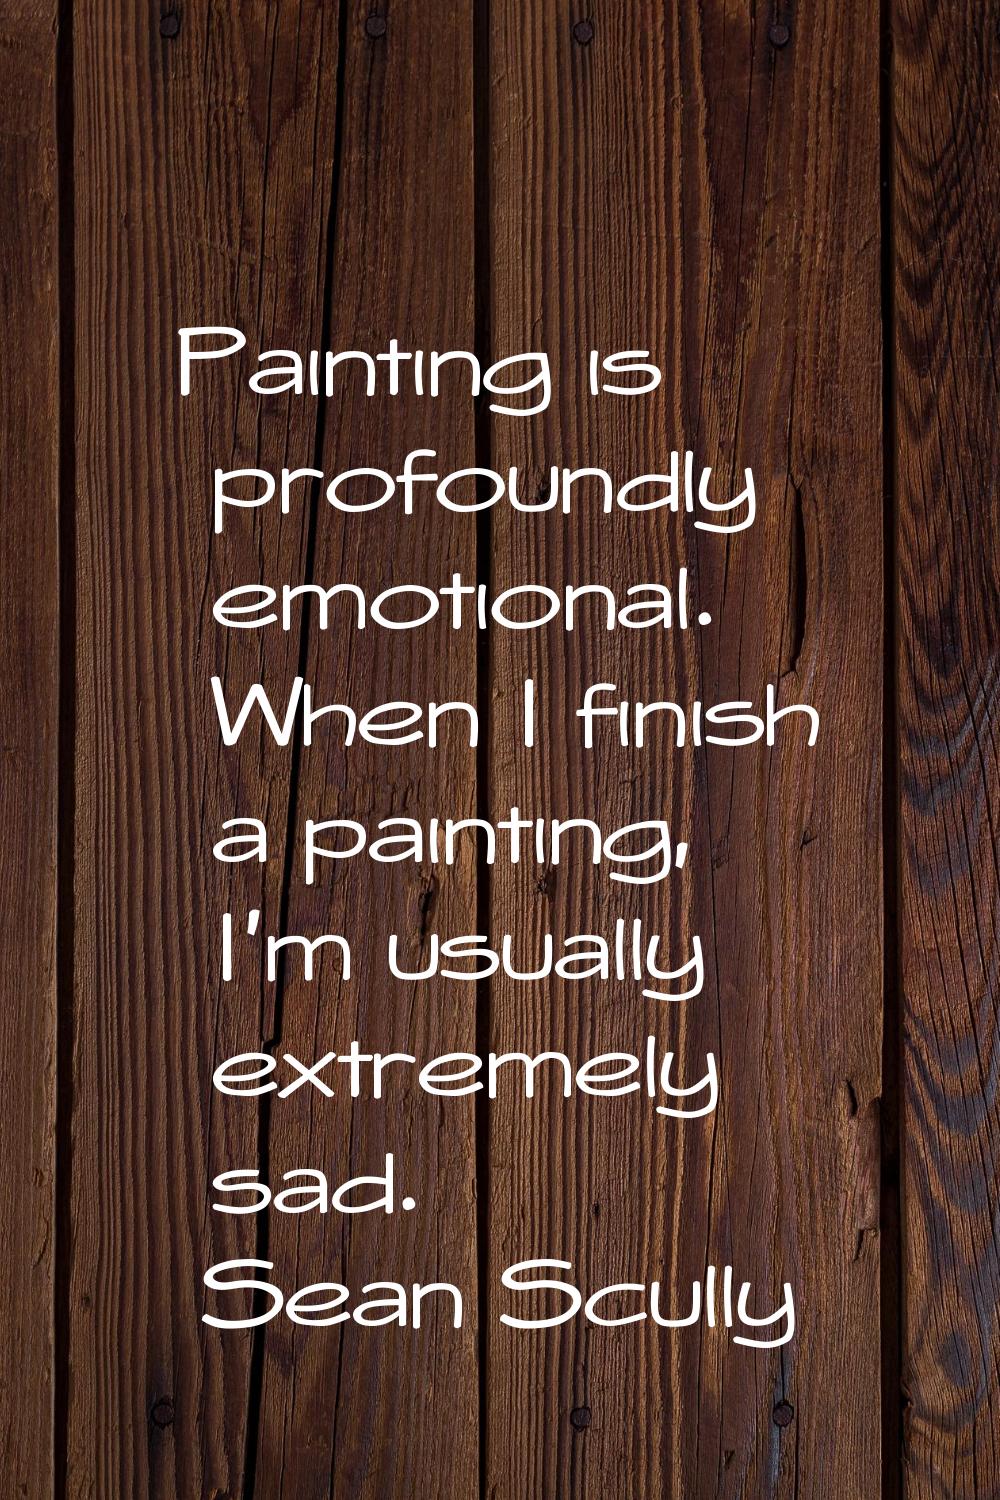 Painting is profoundly emotional. When I finish a painting, I'm usually extremely sad.